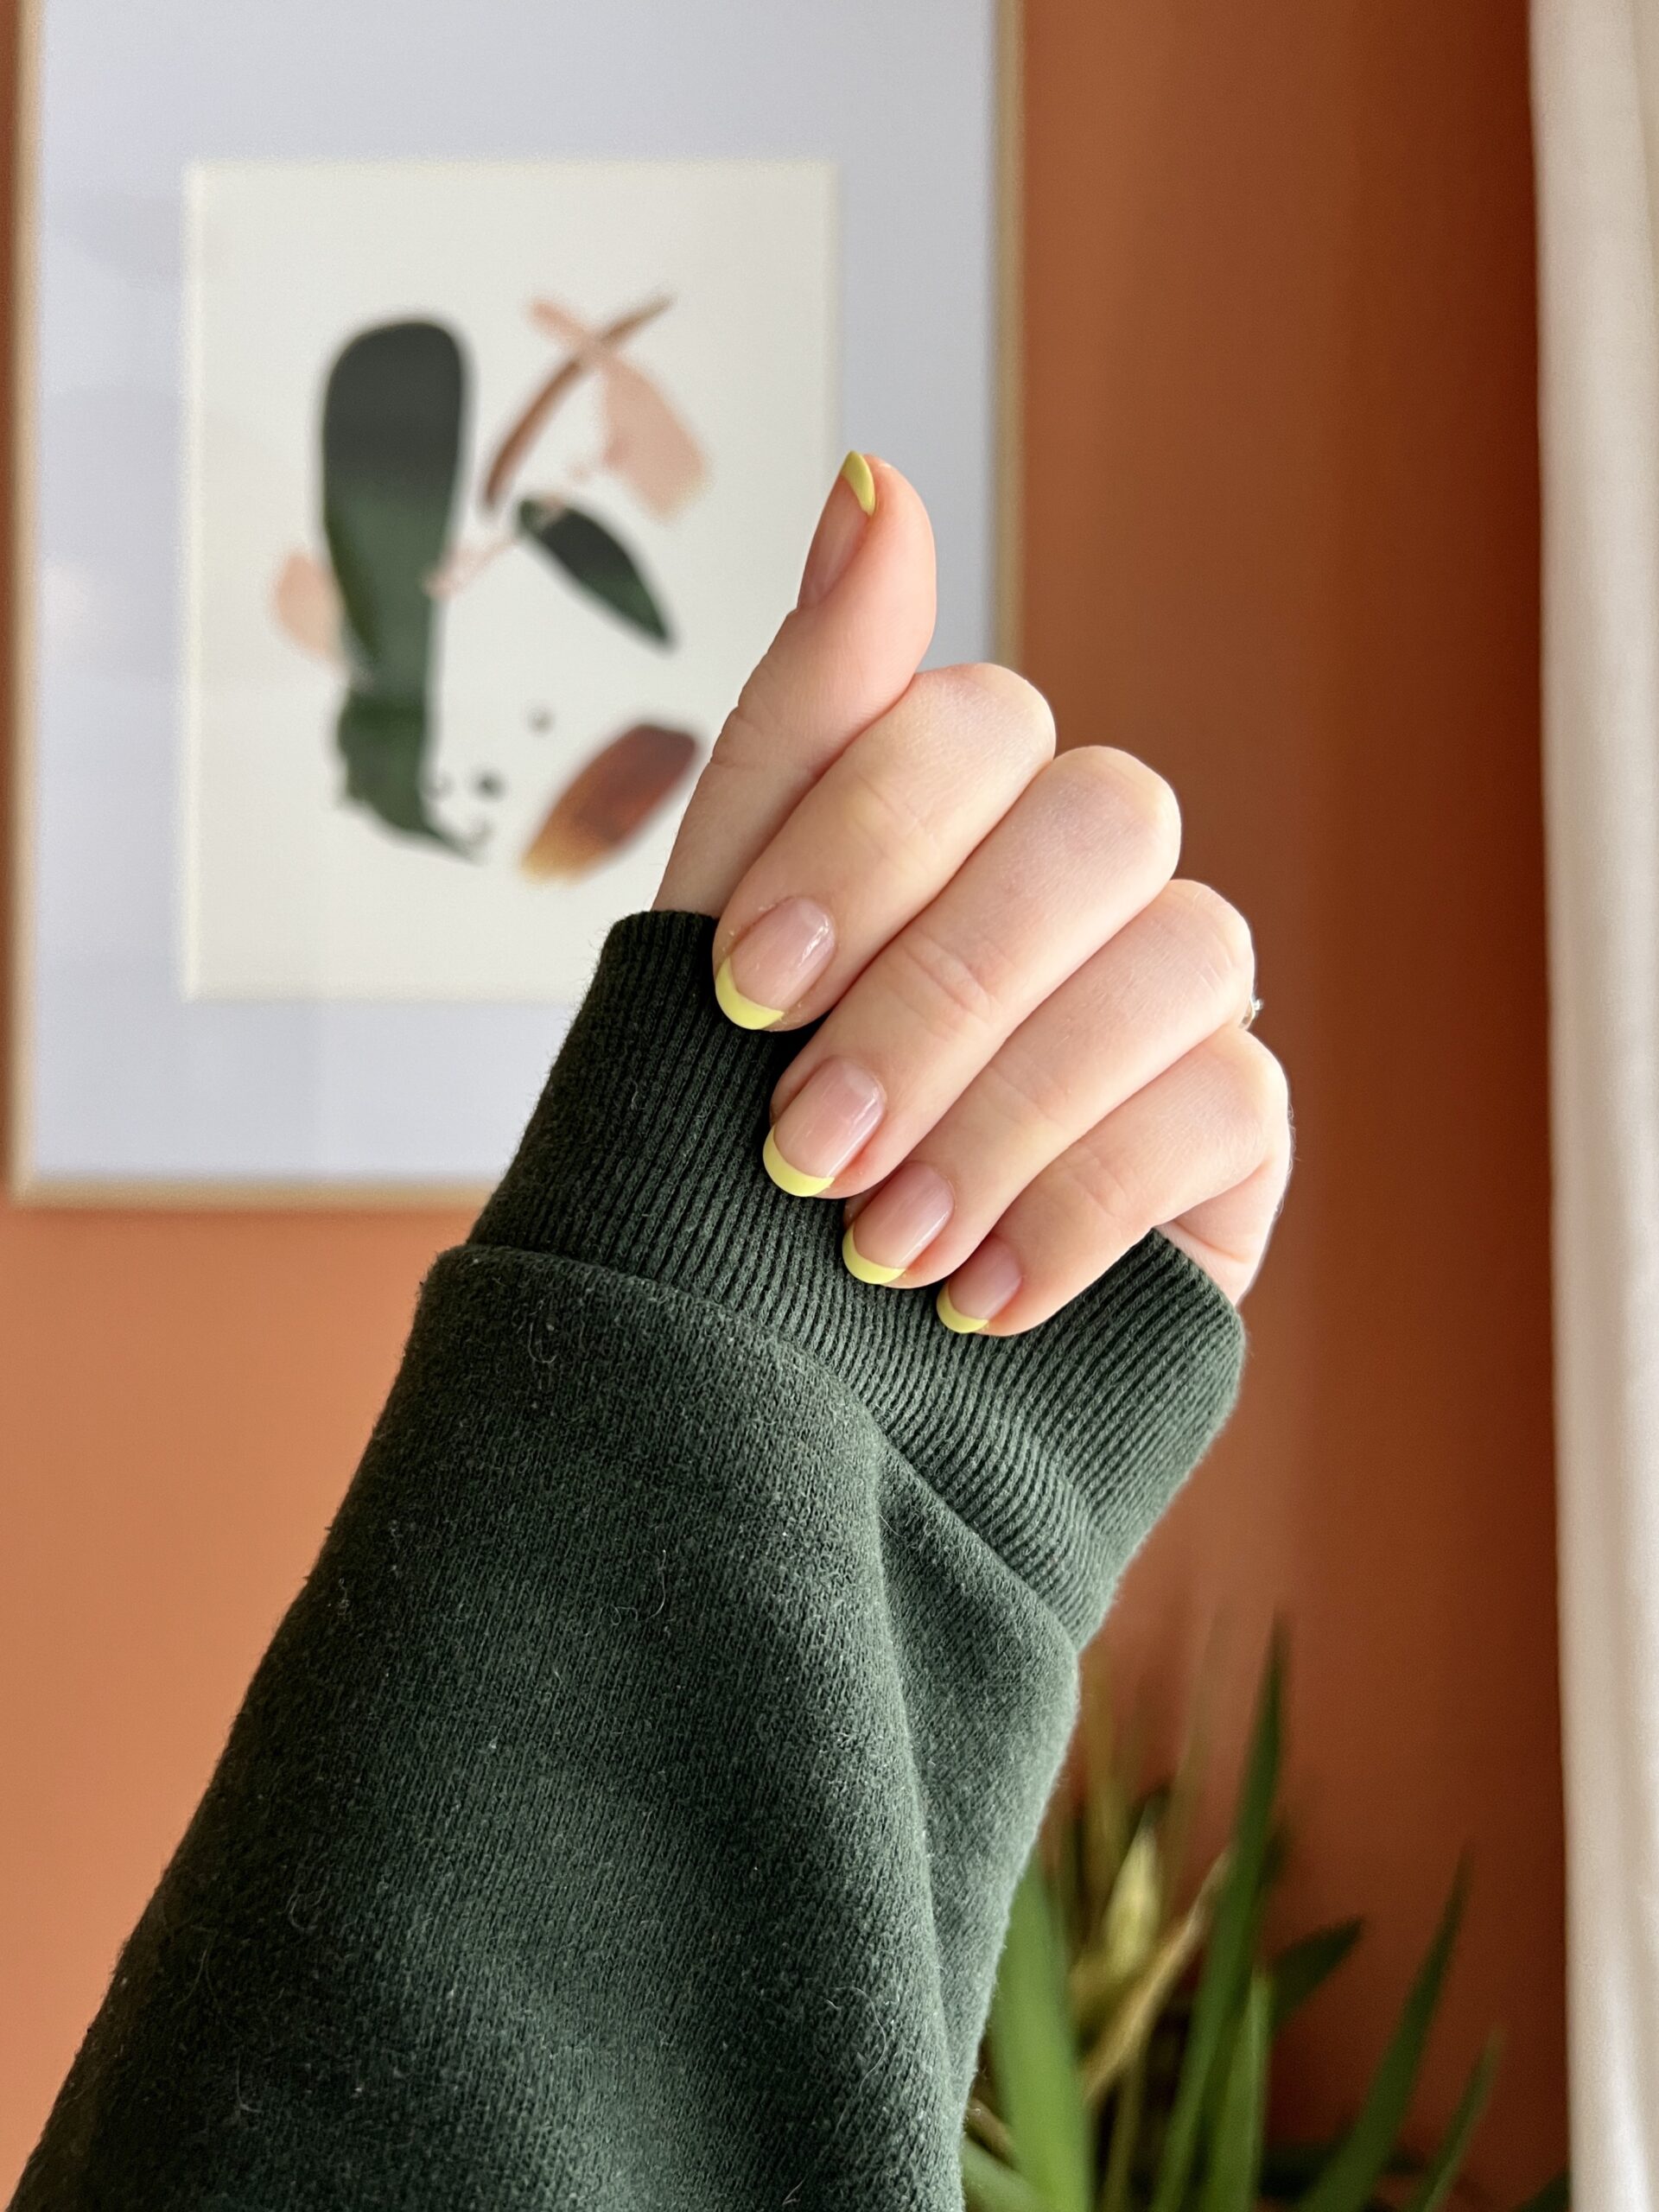 A close up of a hand with green french manicure nails.